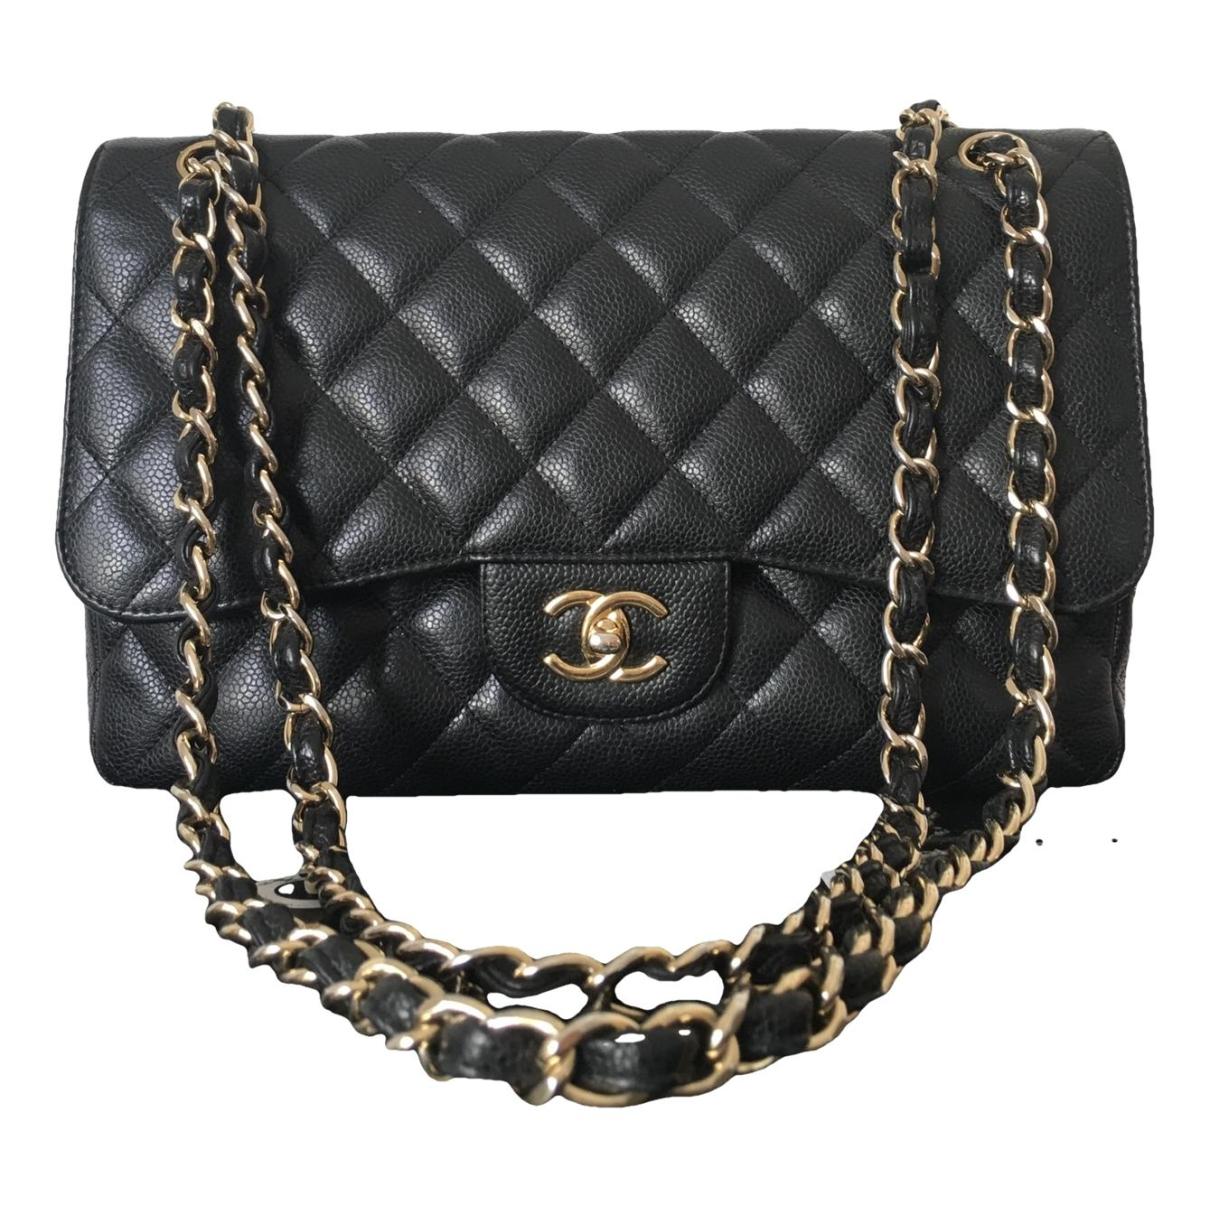 Wallet on chain gabrielle leather crossbody bag Chanel Black in